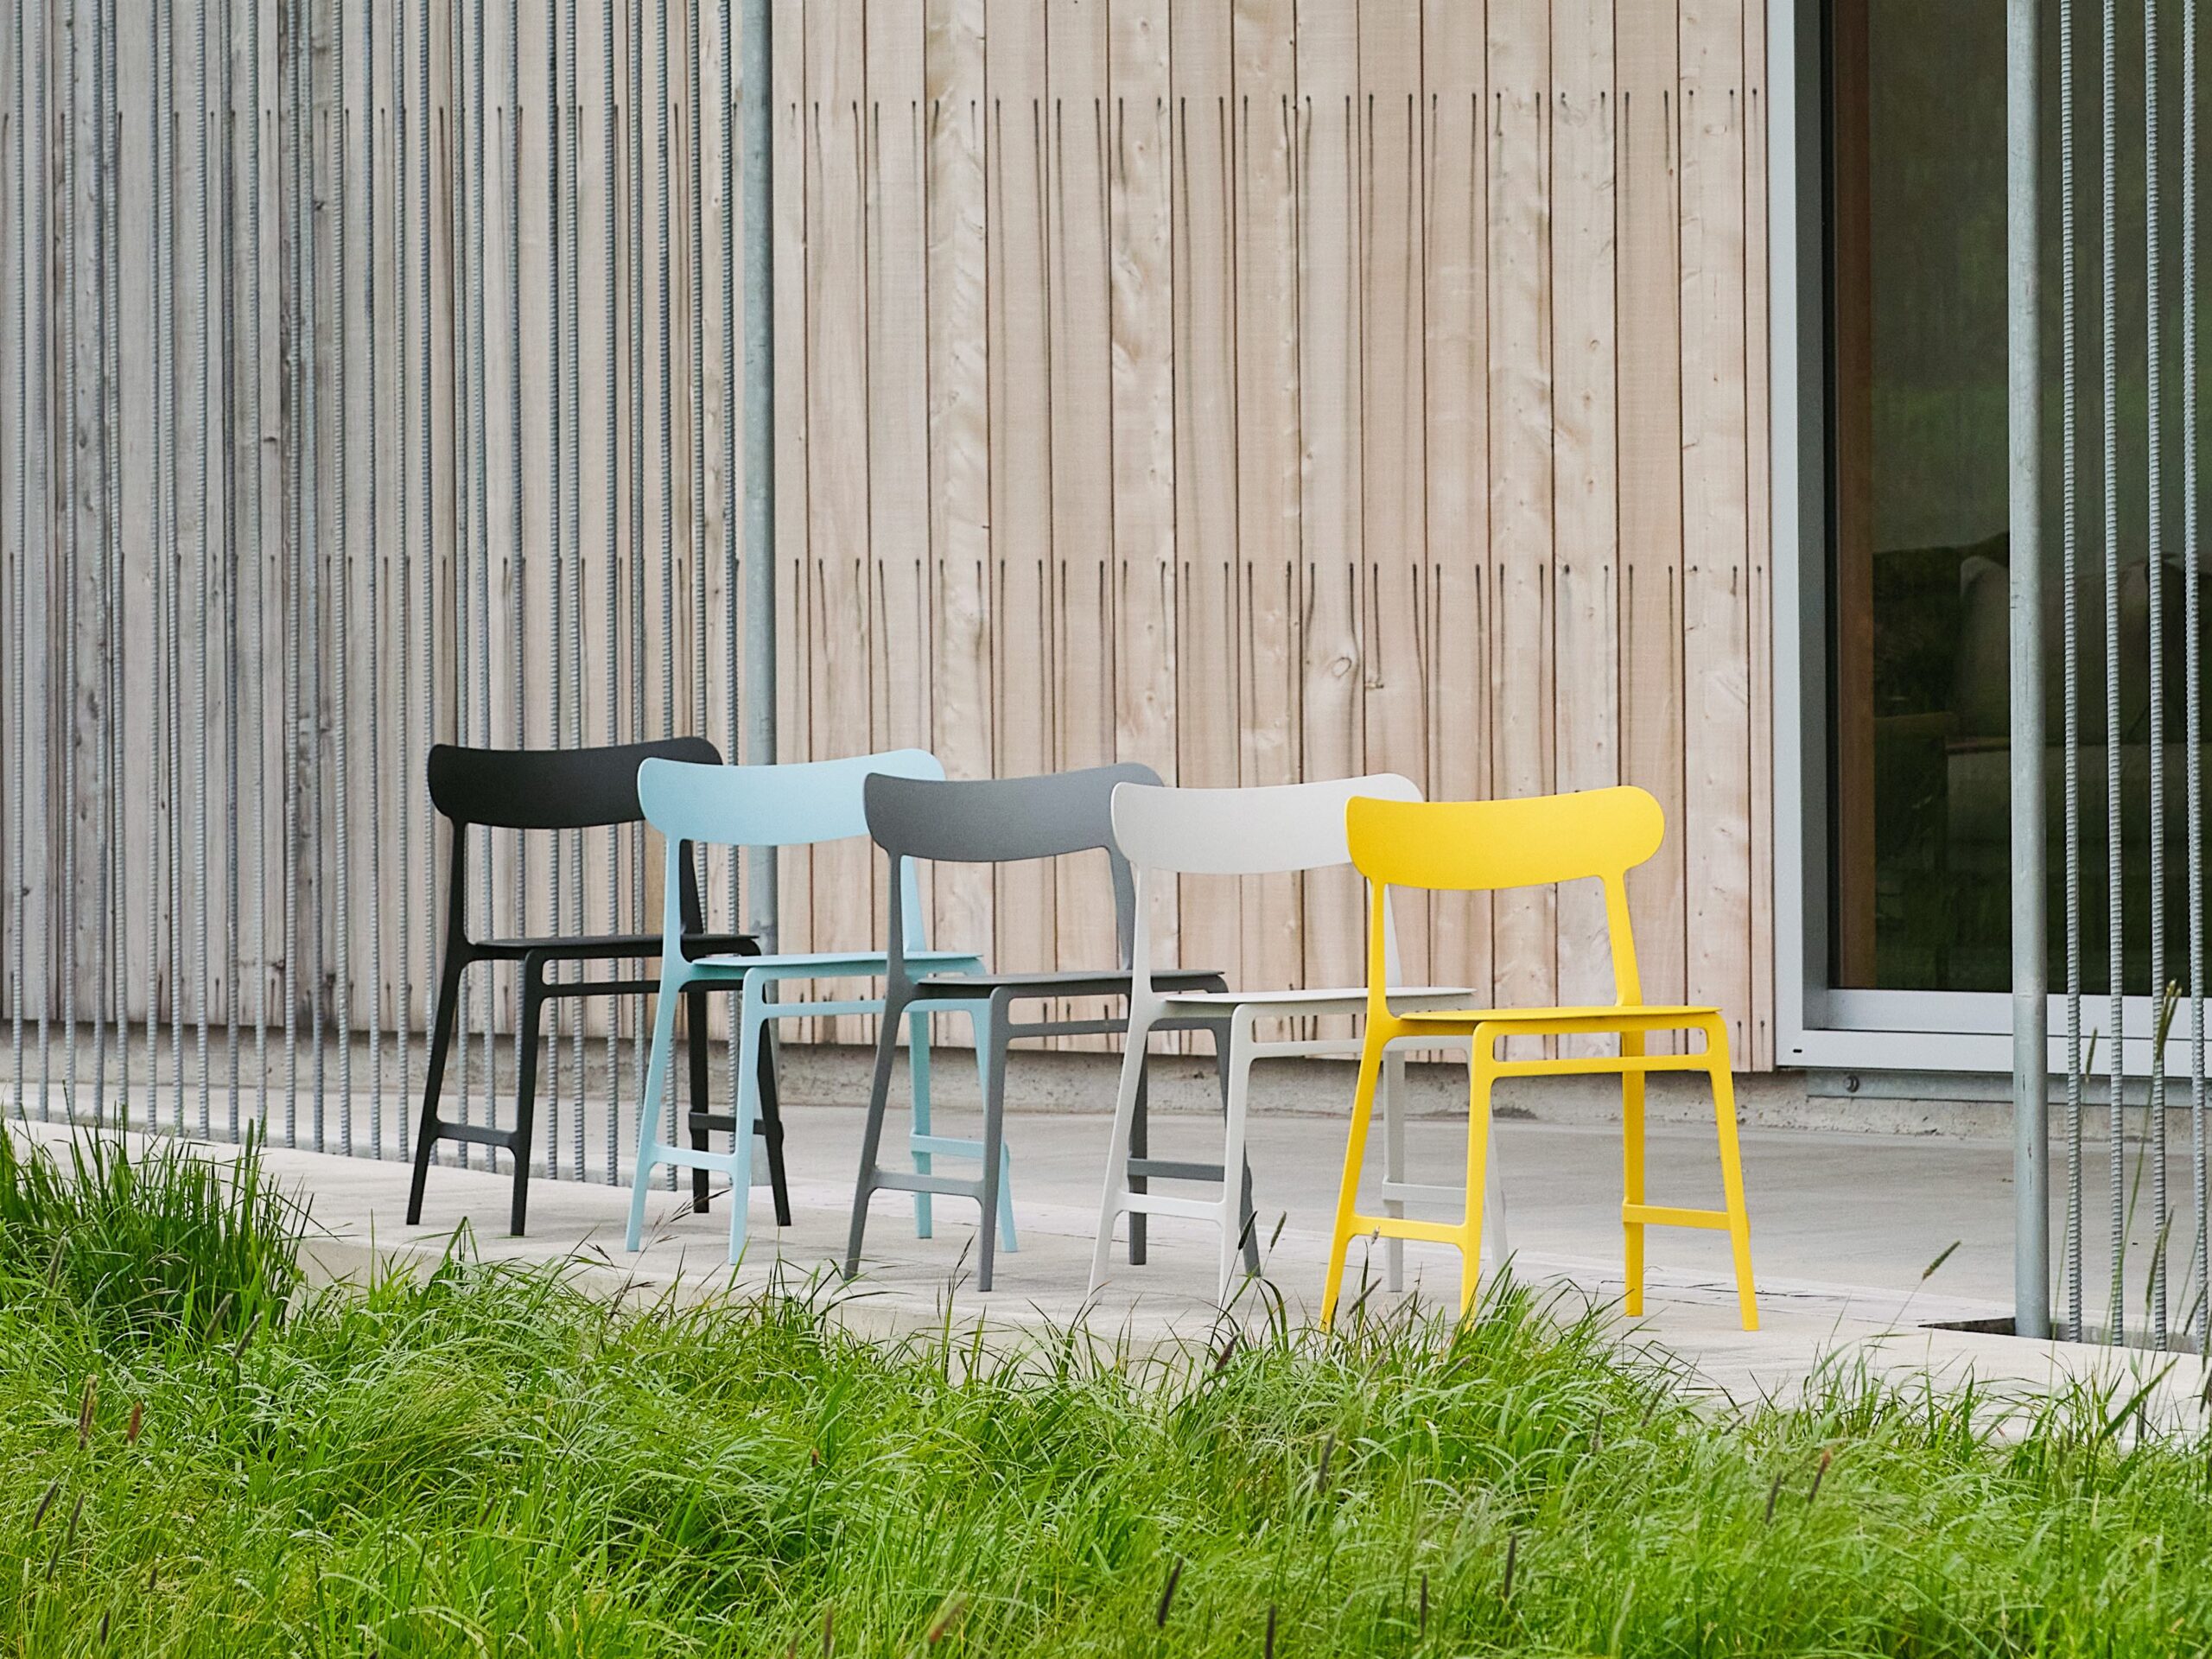 Obo launches Lightly in the UK – an intentionally mobile stacking chair made of plant and post-consumer waste